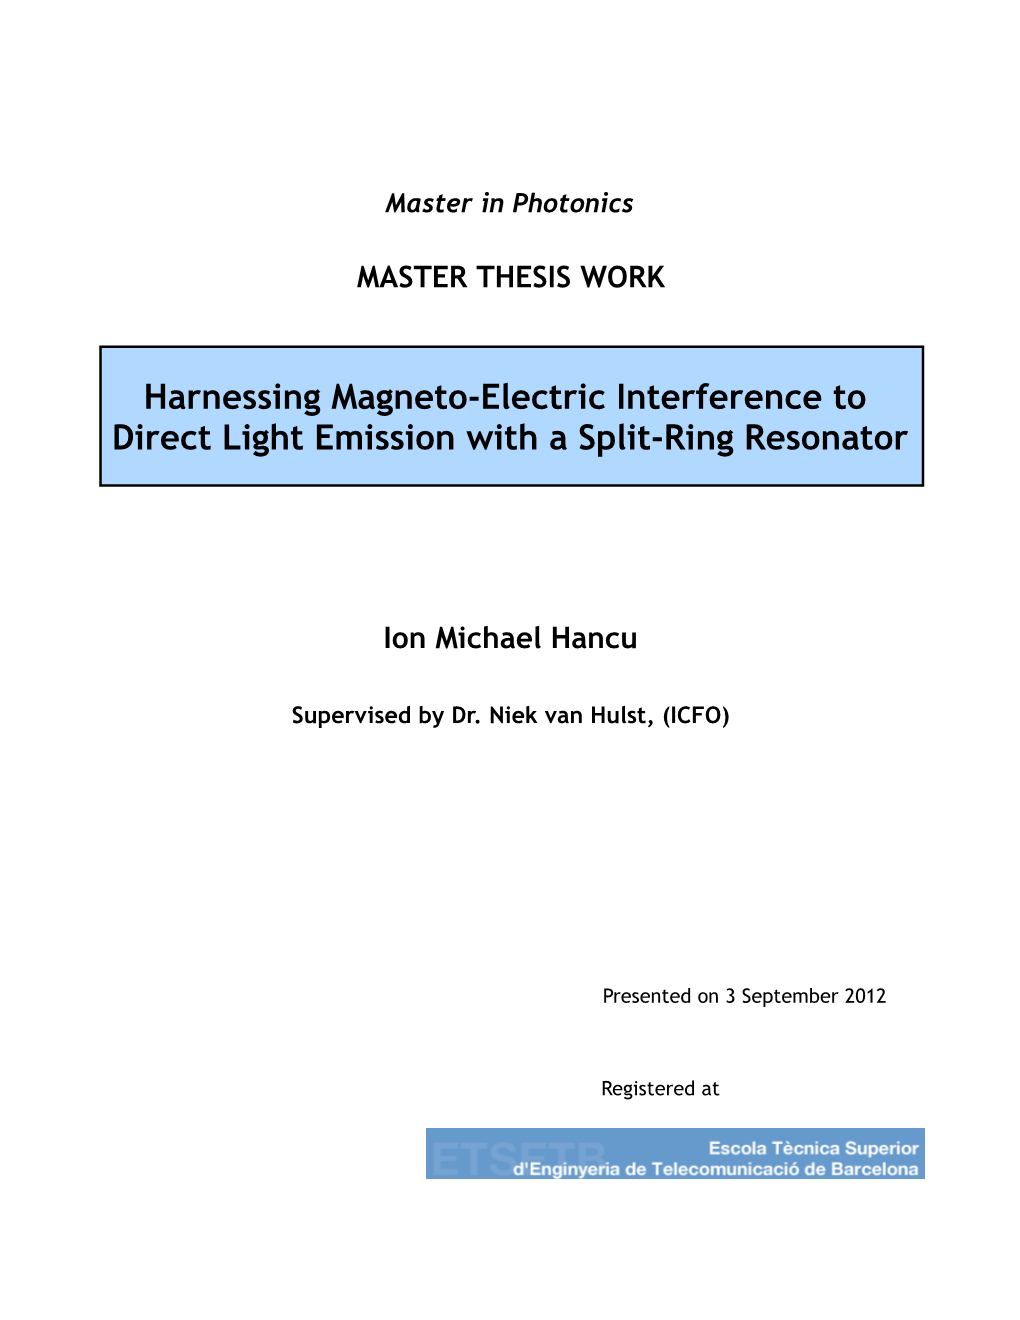 Harnessing Magneto-Electric Interference to Direct Light Emission with a Split-Ring Resonator